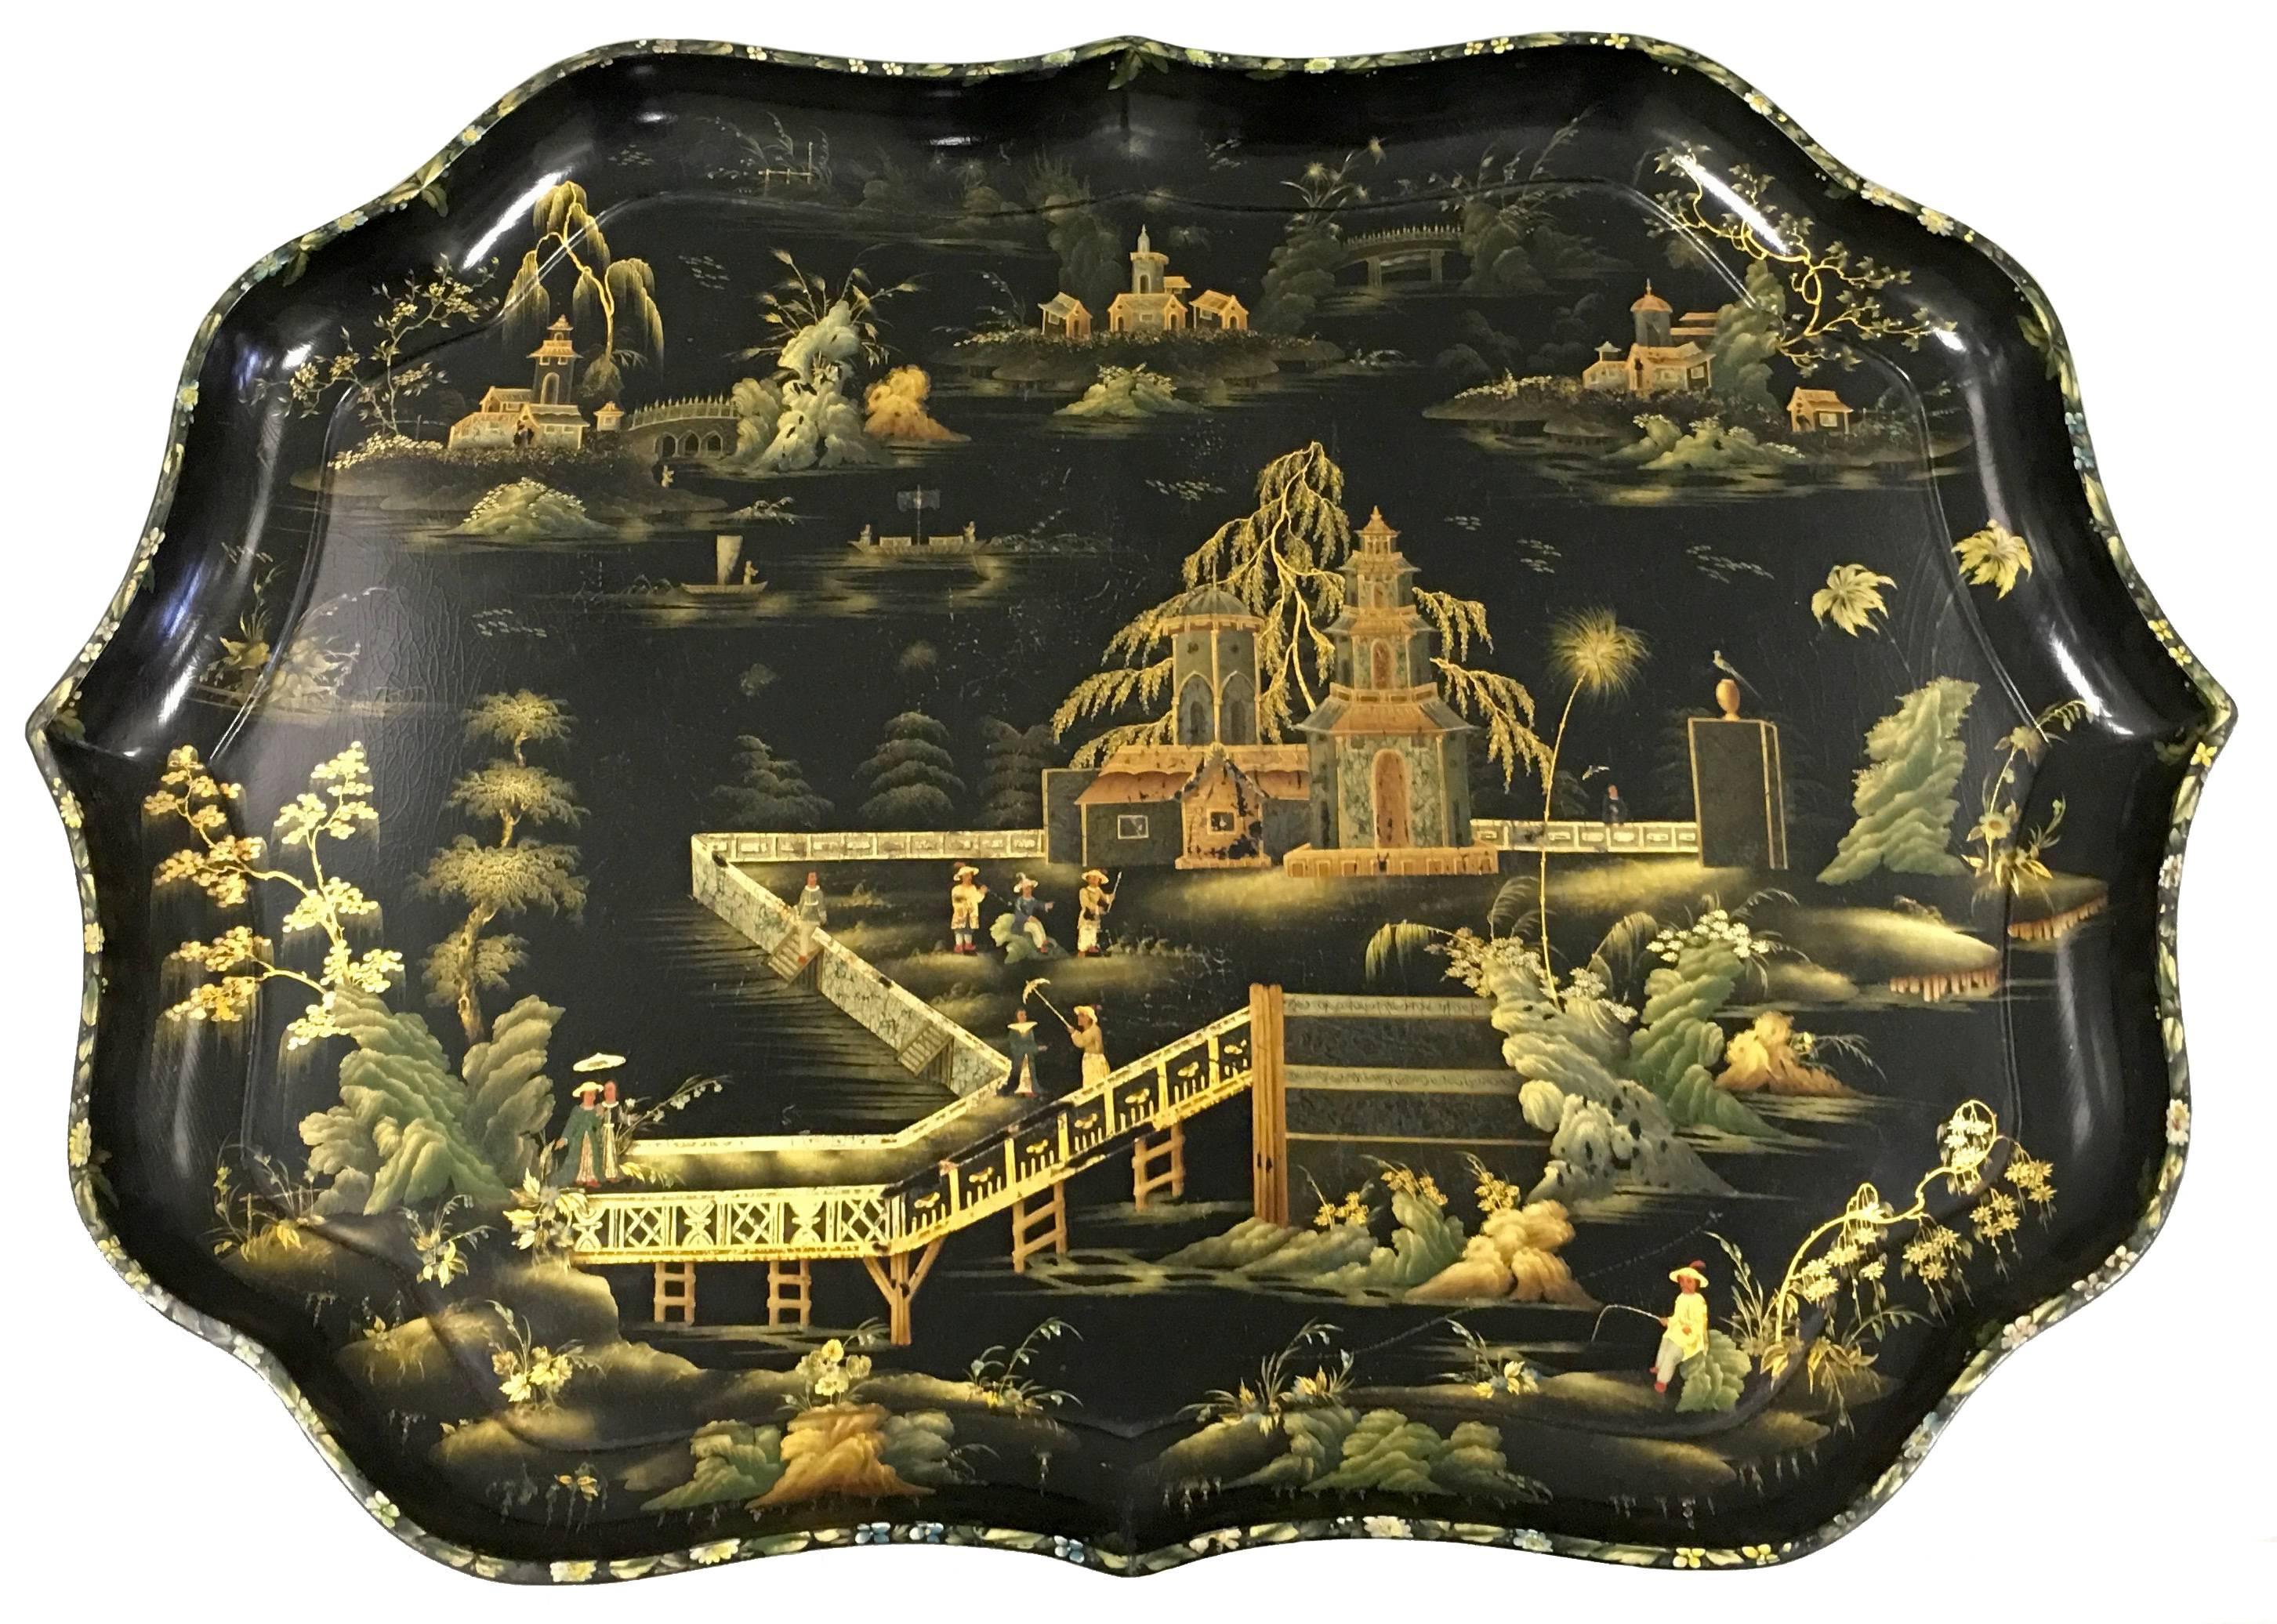 chinoiserie papier mâché tray by Henry Clay. Chinoiserie polychrome scene with gilt detailing. Tray is stamped Clay King St Cov't Garden (London.)
Custom stand of a later period in black lacquered wood.